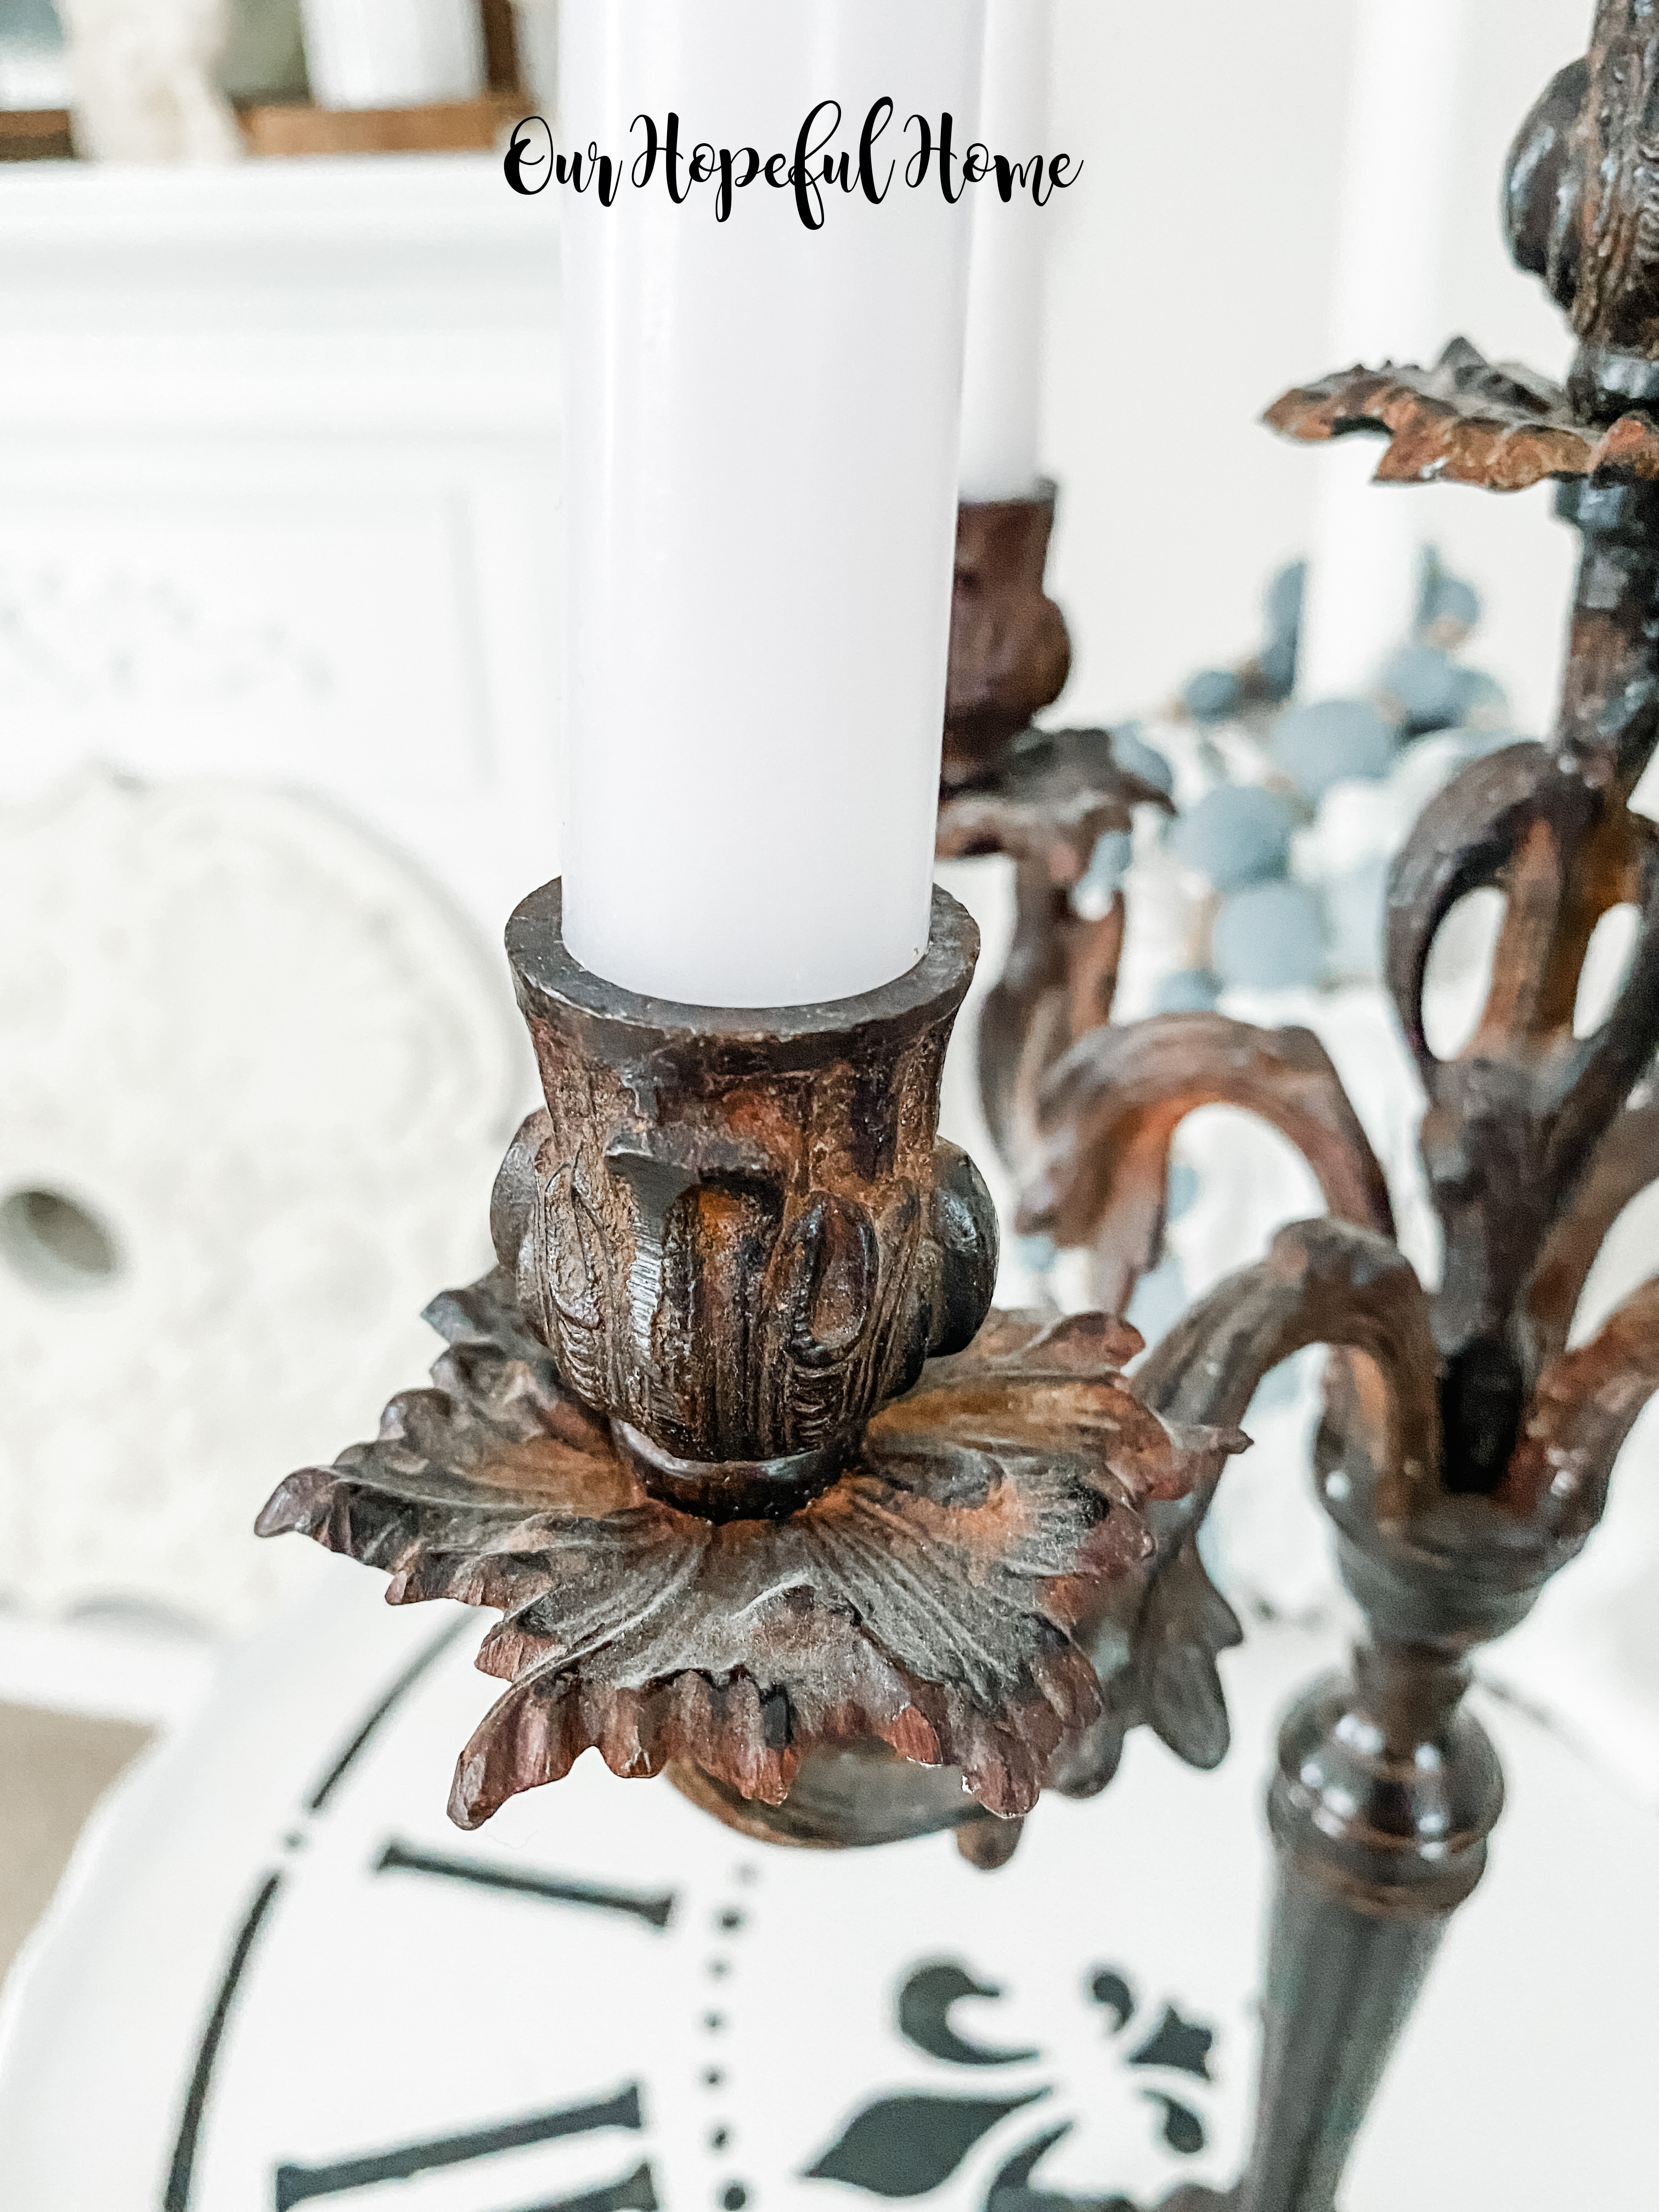 Gold Leaf A Thrift Store Candelabra - How To 